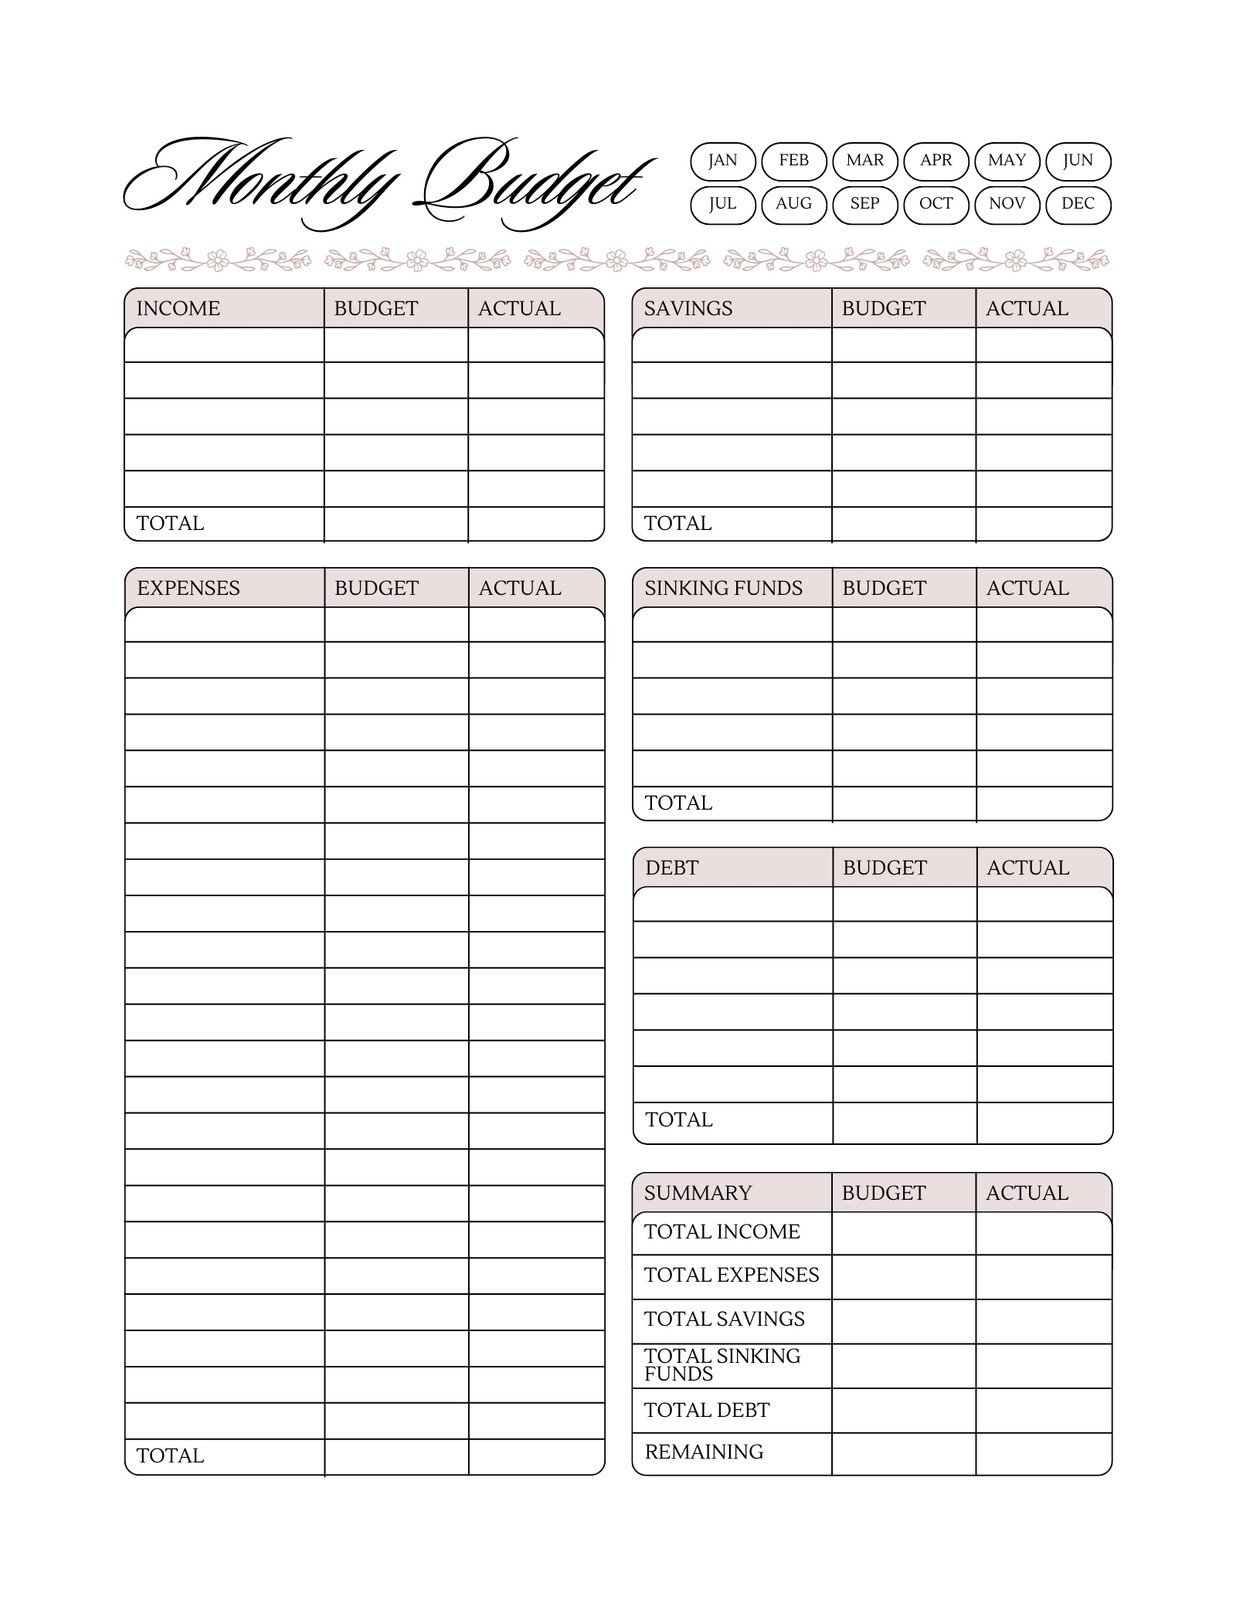 Free And Customizable Budget Templates intended for Free Budget Printable Template